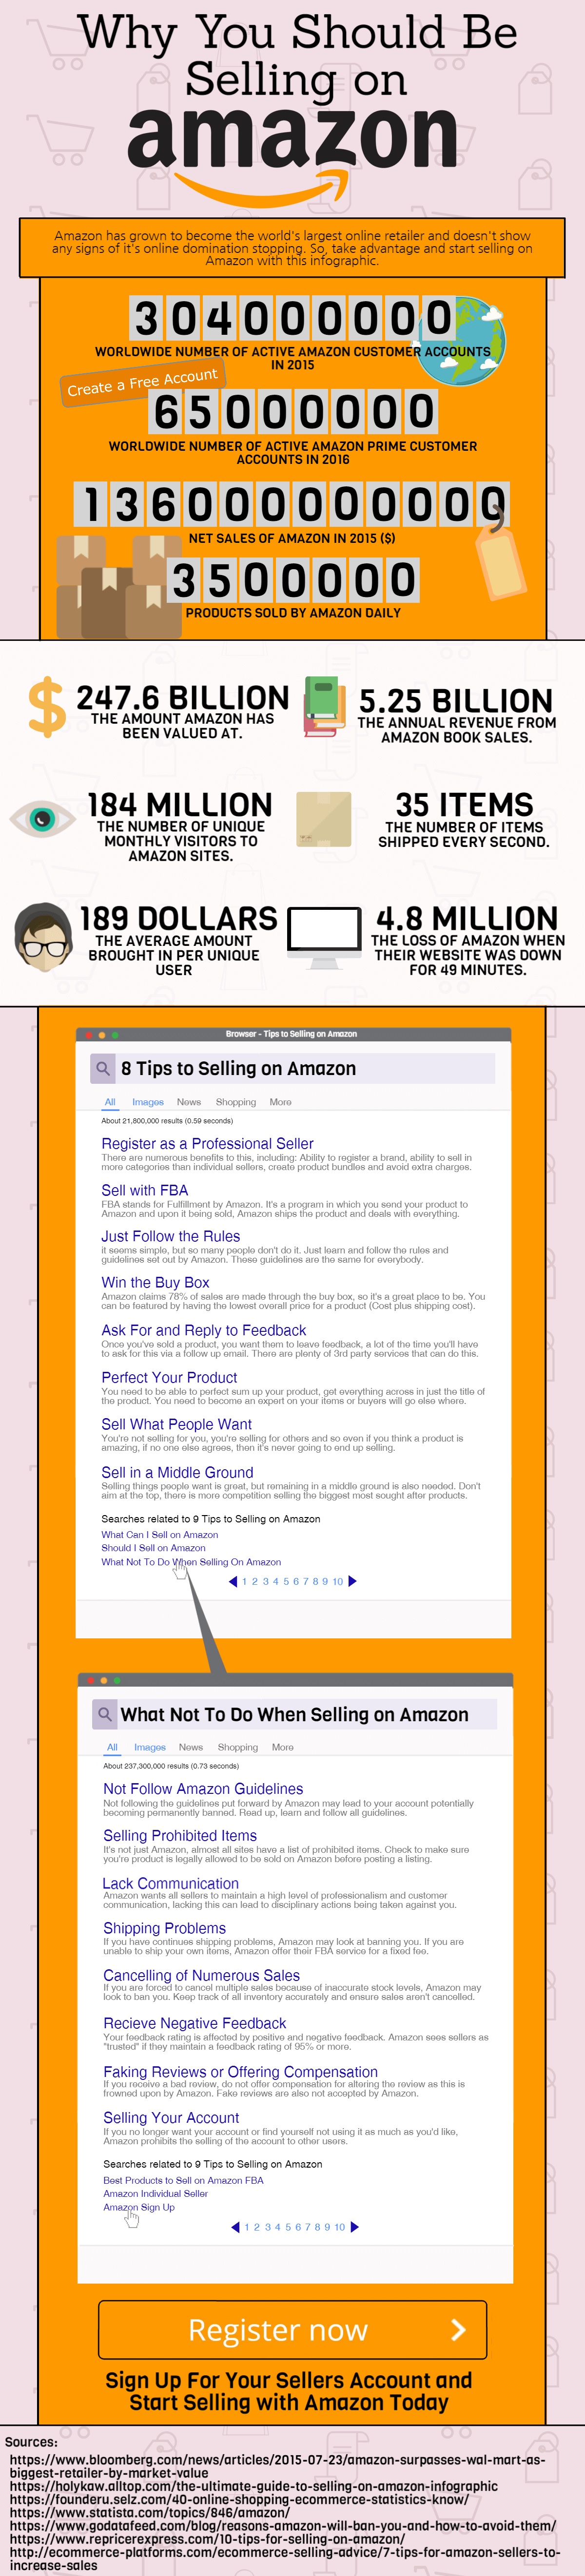 Why Sell on Amazon? [Infographic]